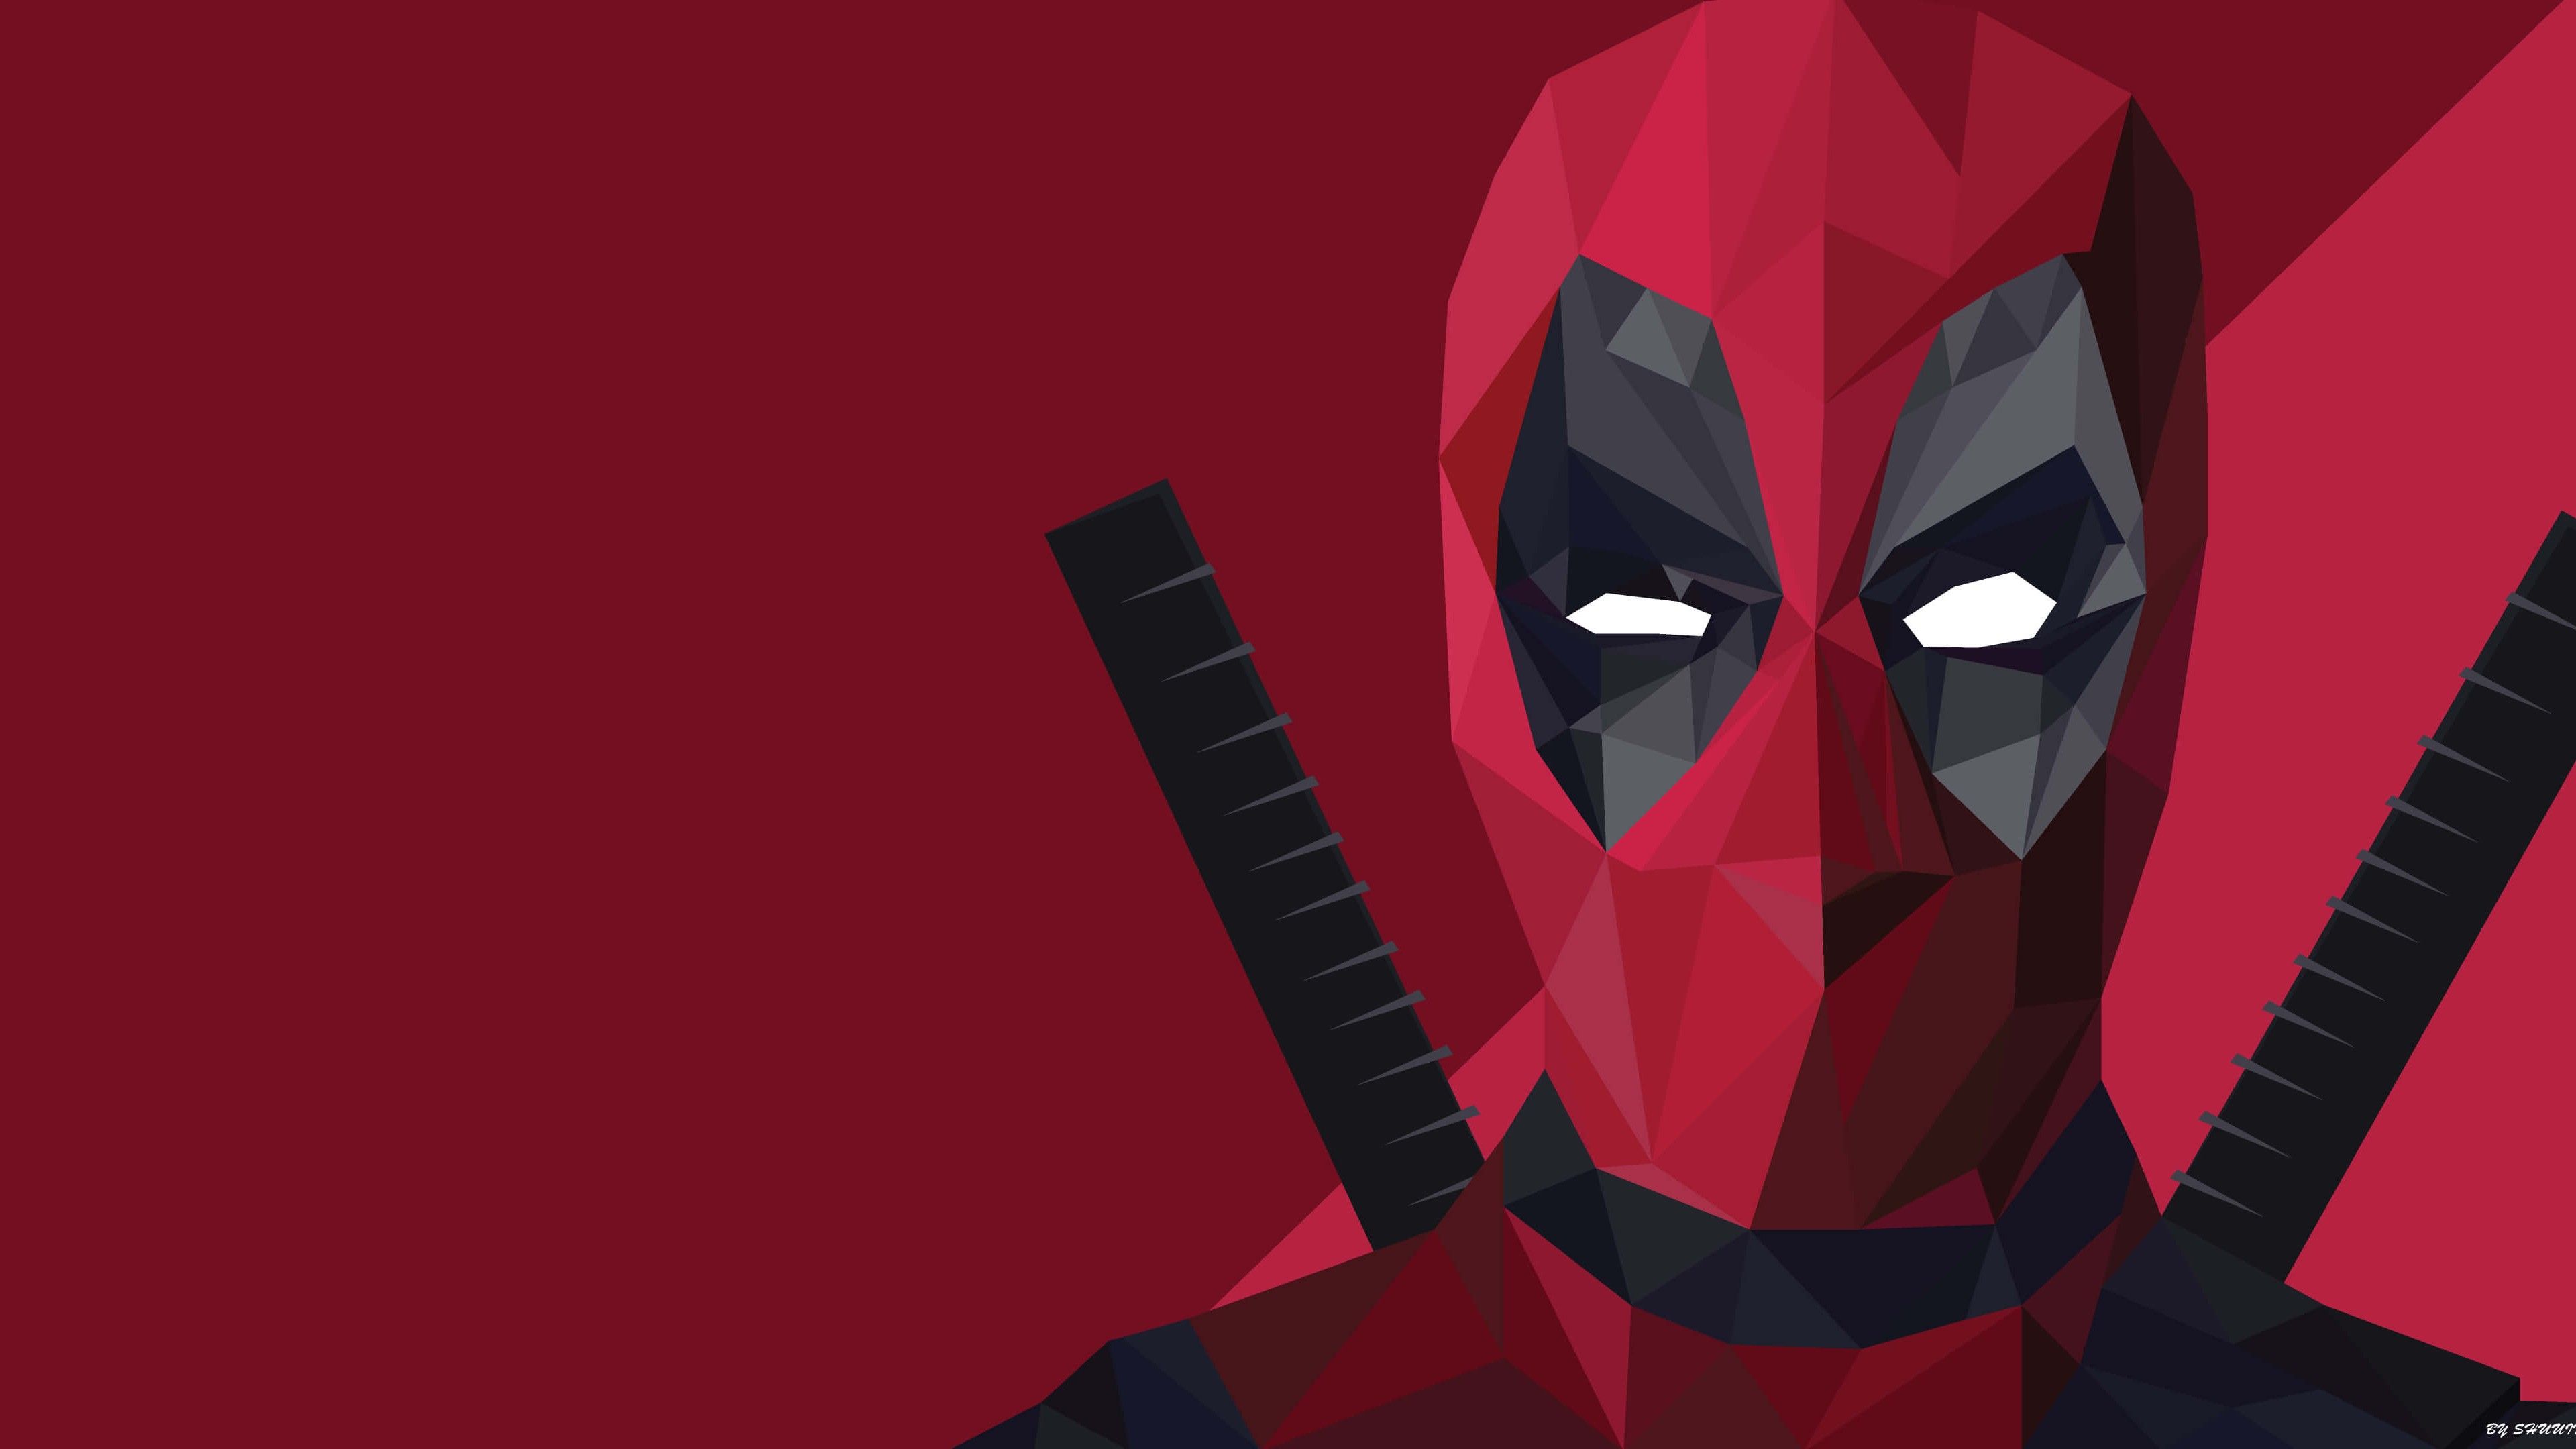 Imgur: The most awesome image on the Internet. Deadpool wallpaper desktop, Deadpool wallpaper, Deadpool HD wallpaper